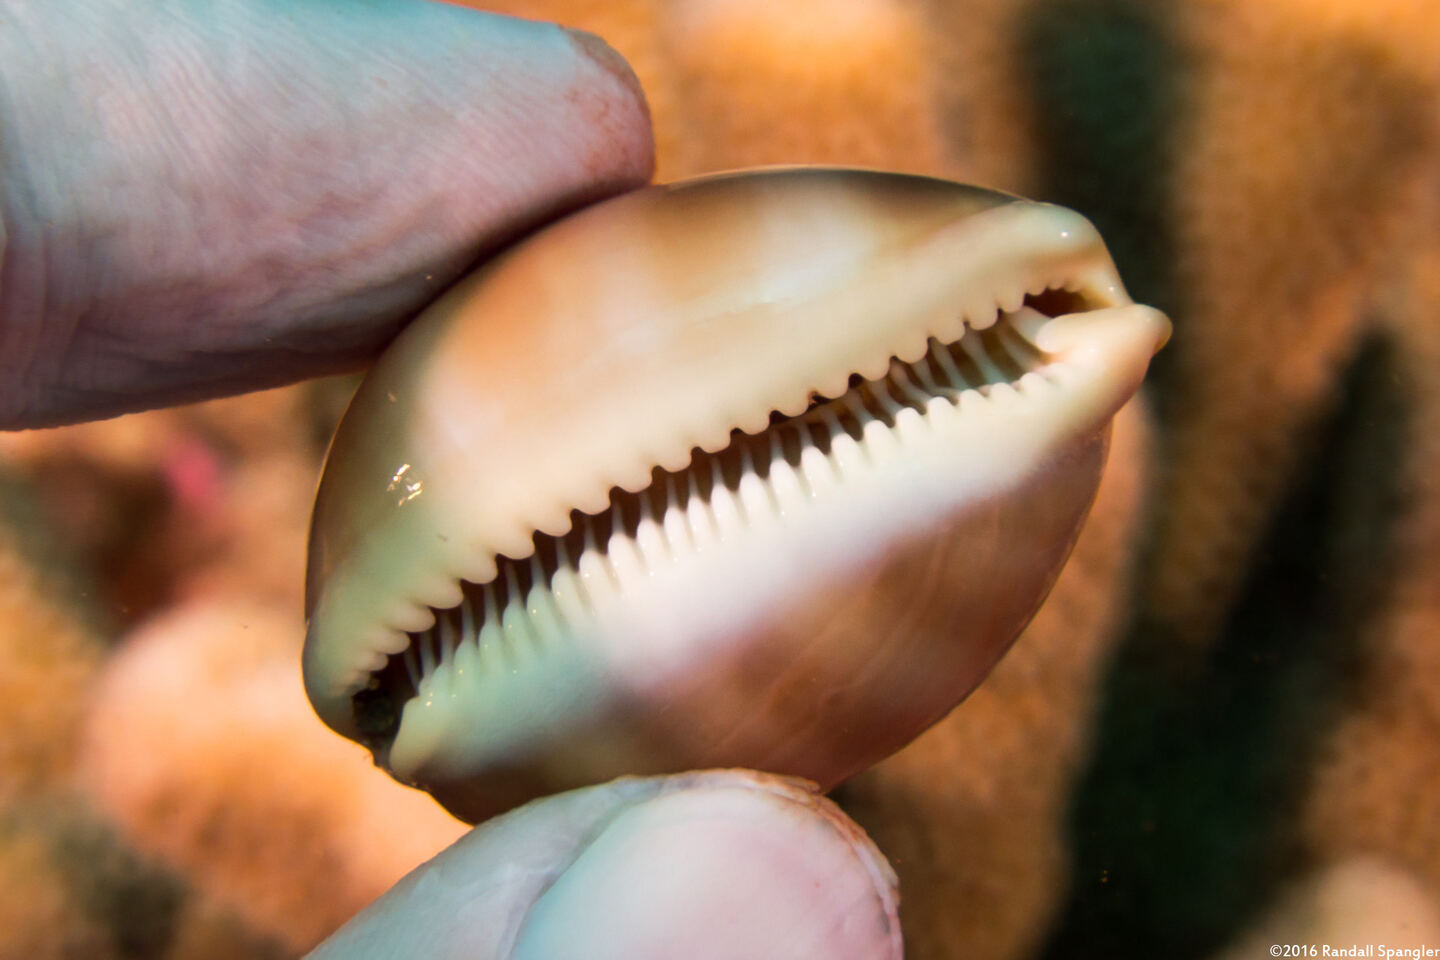 Lyncina sulcidentata (Groove-Tooth Cowry); See the grooves from the teeth?